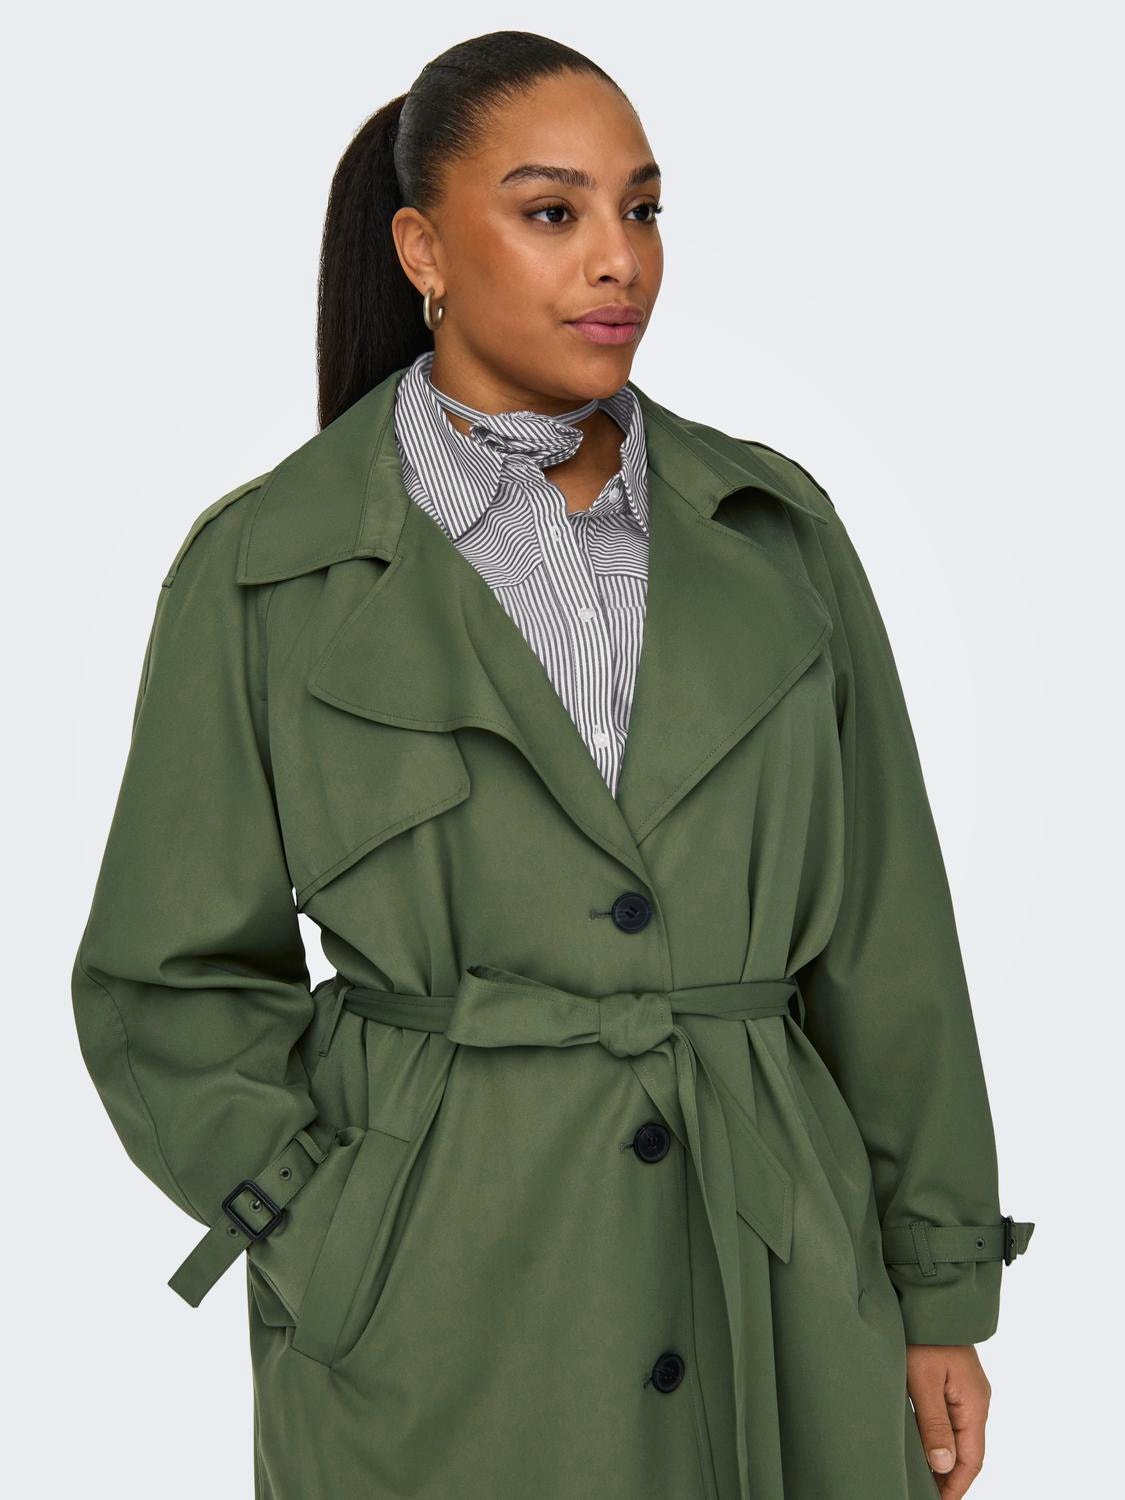 ONLY Curvy trenchcoat -Four Leaf Clover - 15310056